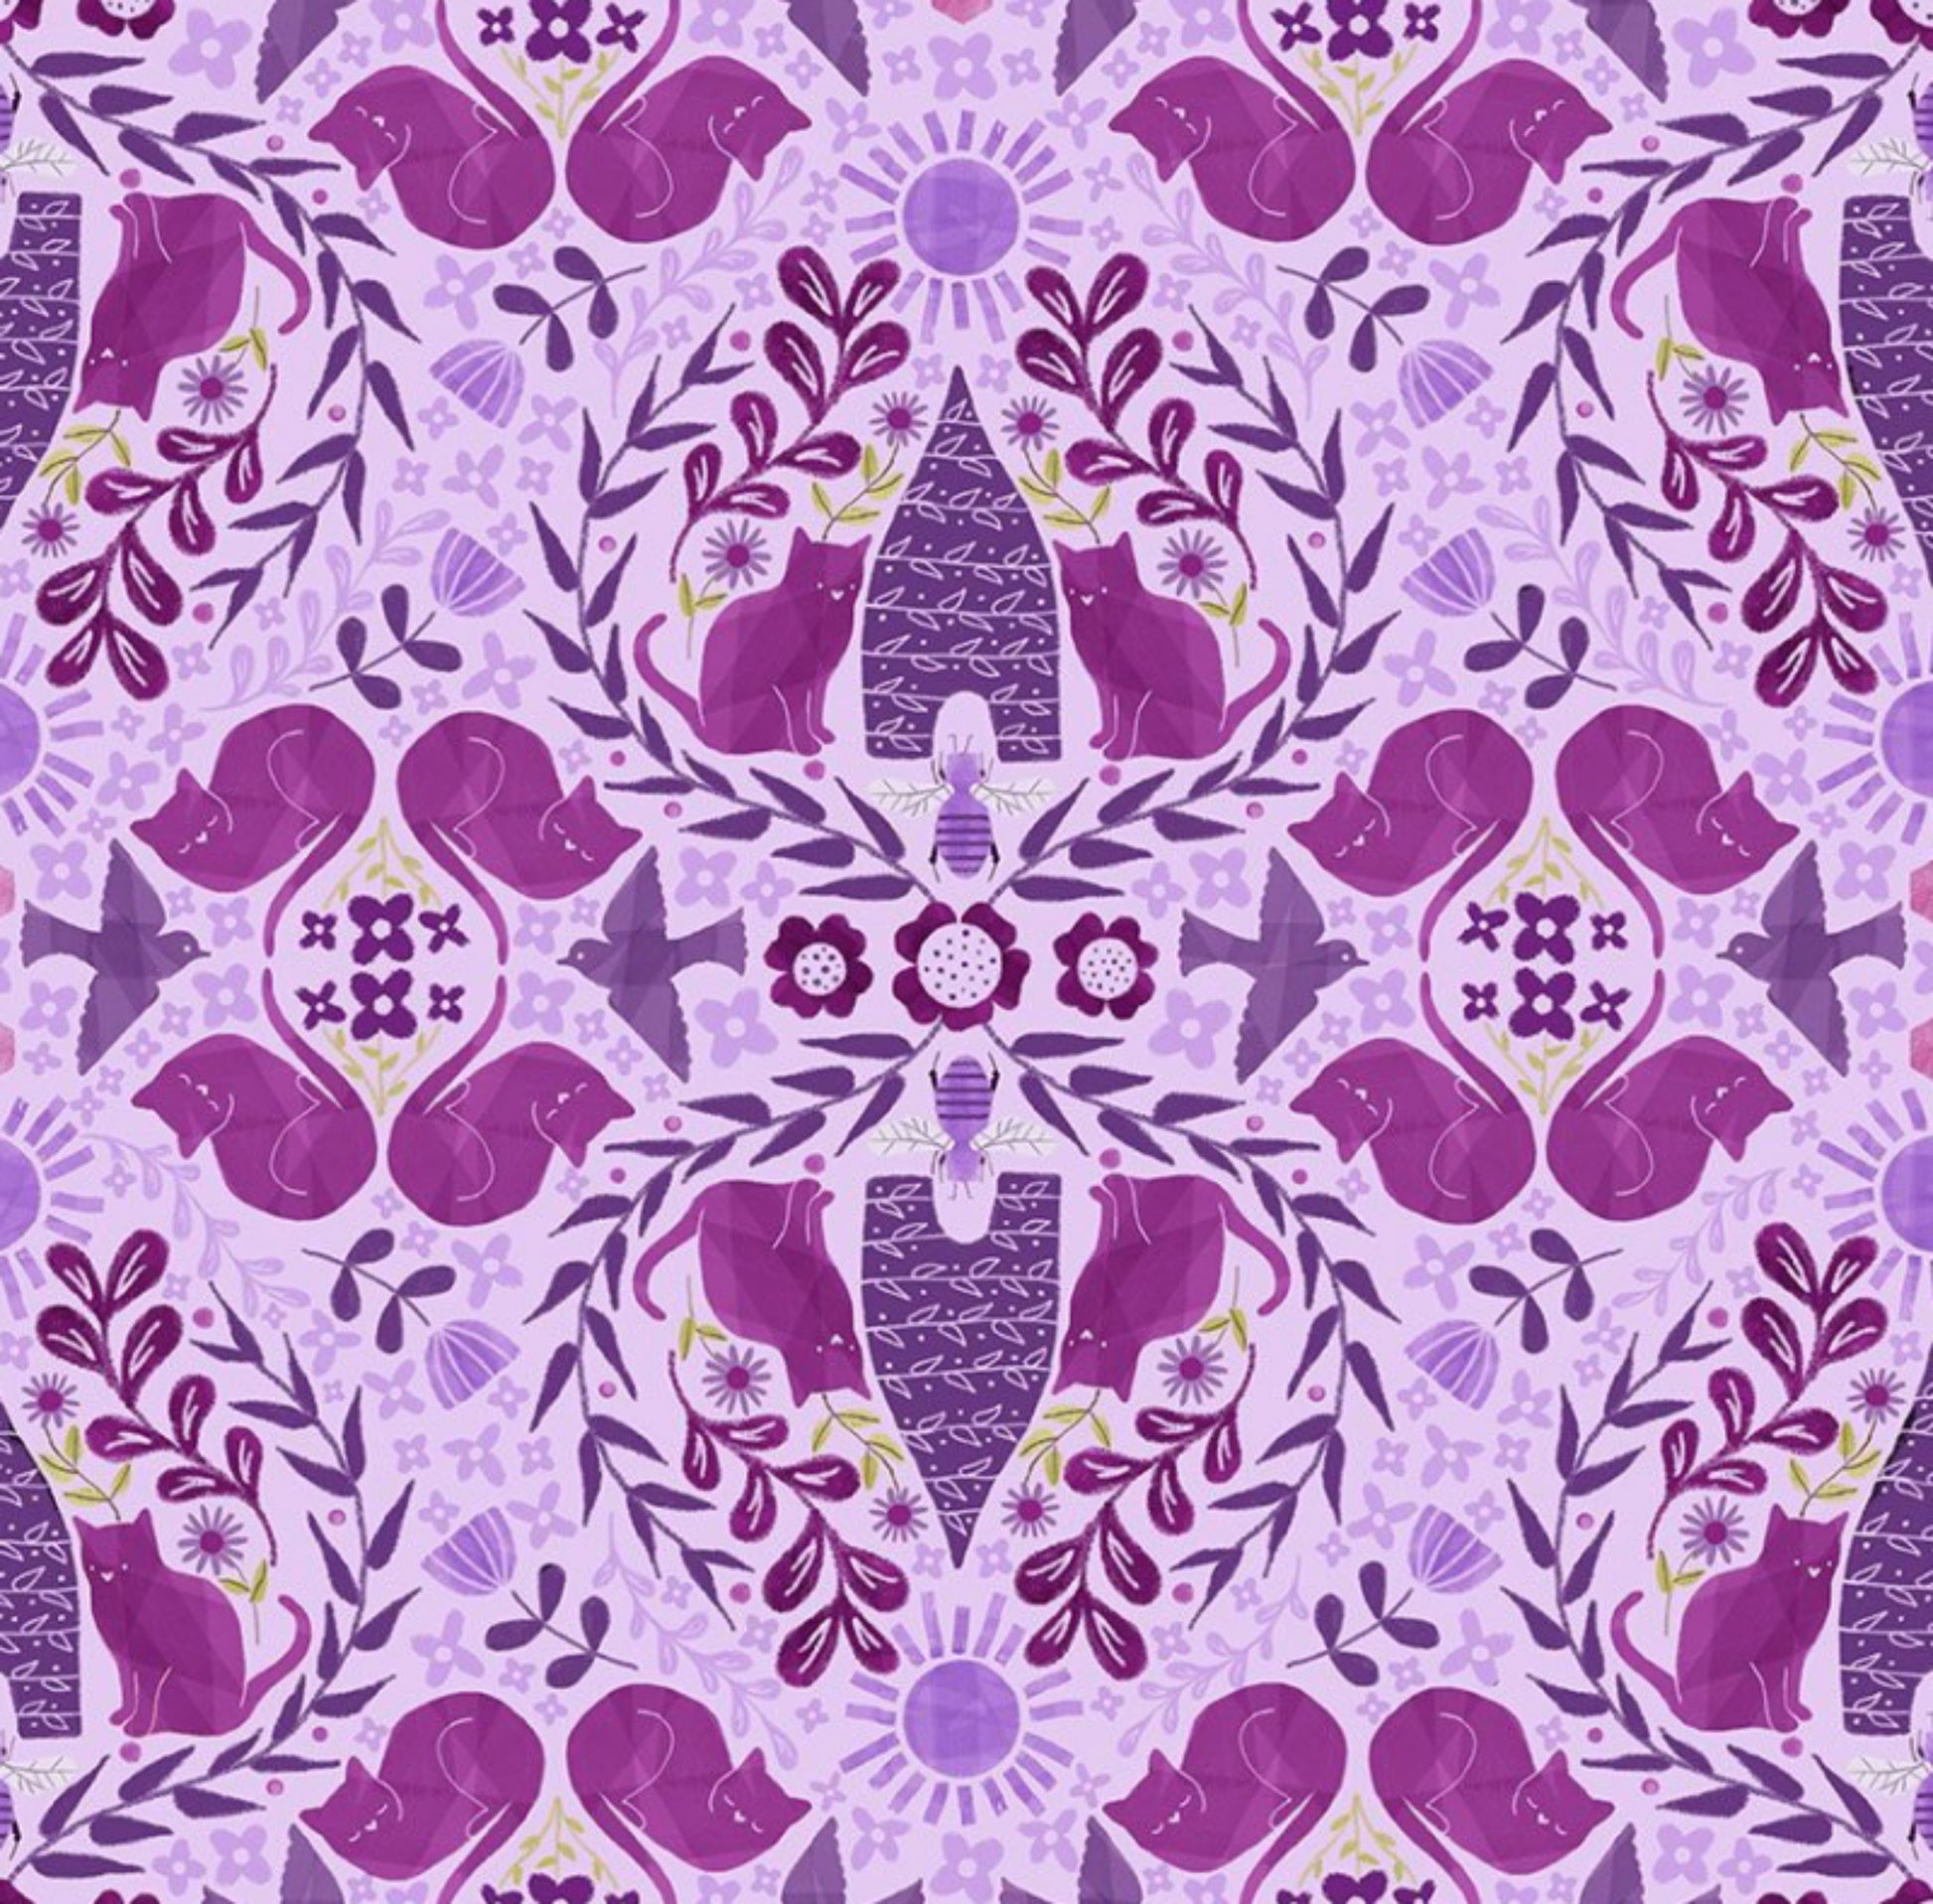 Hive Mind Fabreic in Grape - from the Curious Garden Collection by Pammie Jane for Dear Stella Fabrics - light purple fabric with hidden cats and beehives.